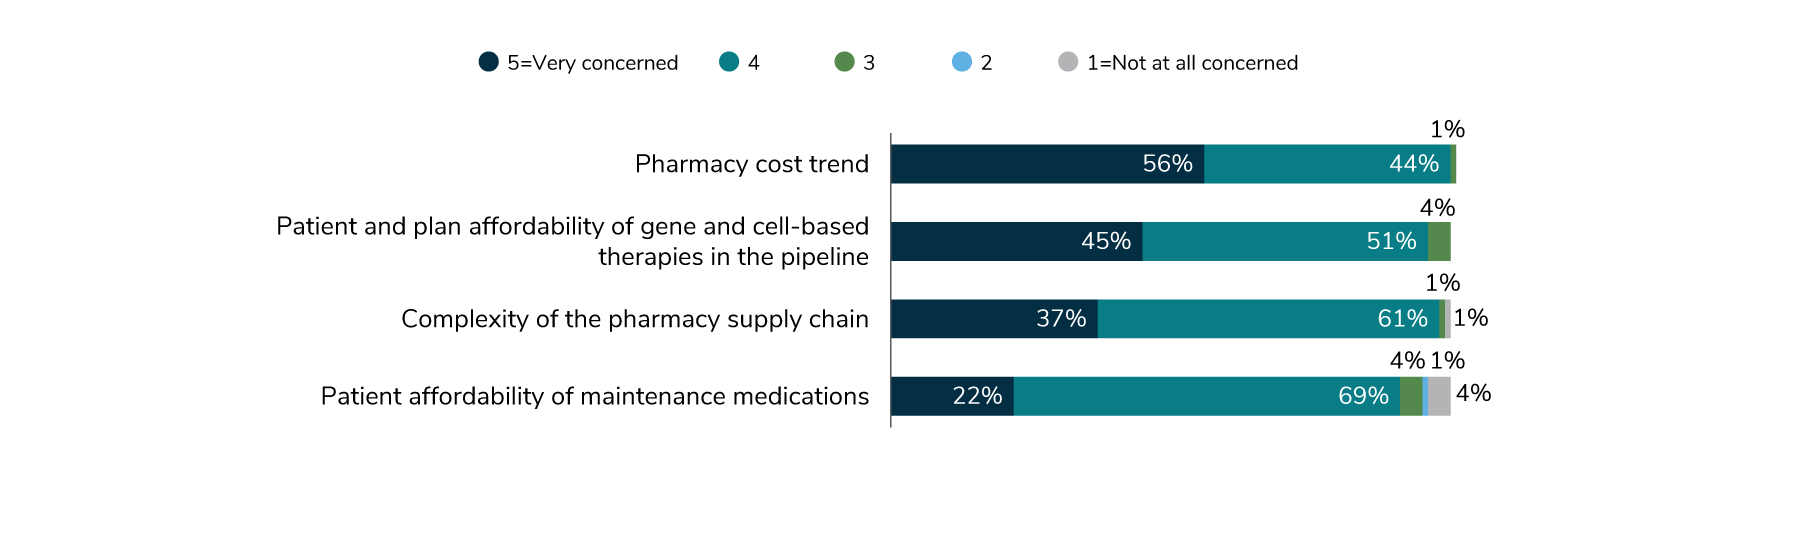 Employers are very concerned about pharmacy cost trend (56%), patient and plan affordability of gene therapies (45%), complexity of the supply chain (37%), and patient affordability of maintenance medications (22%).